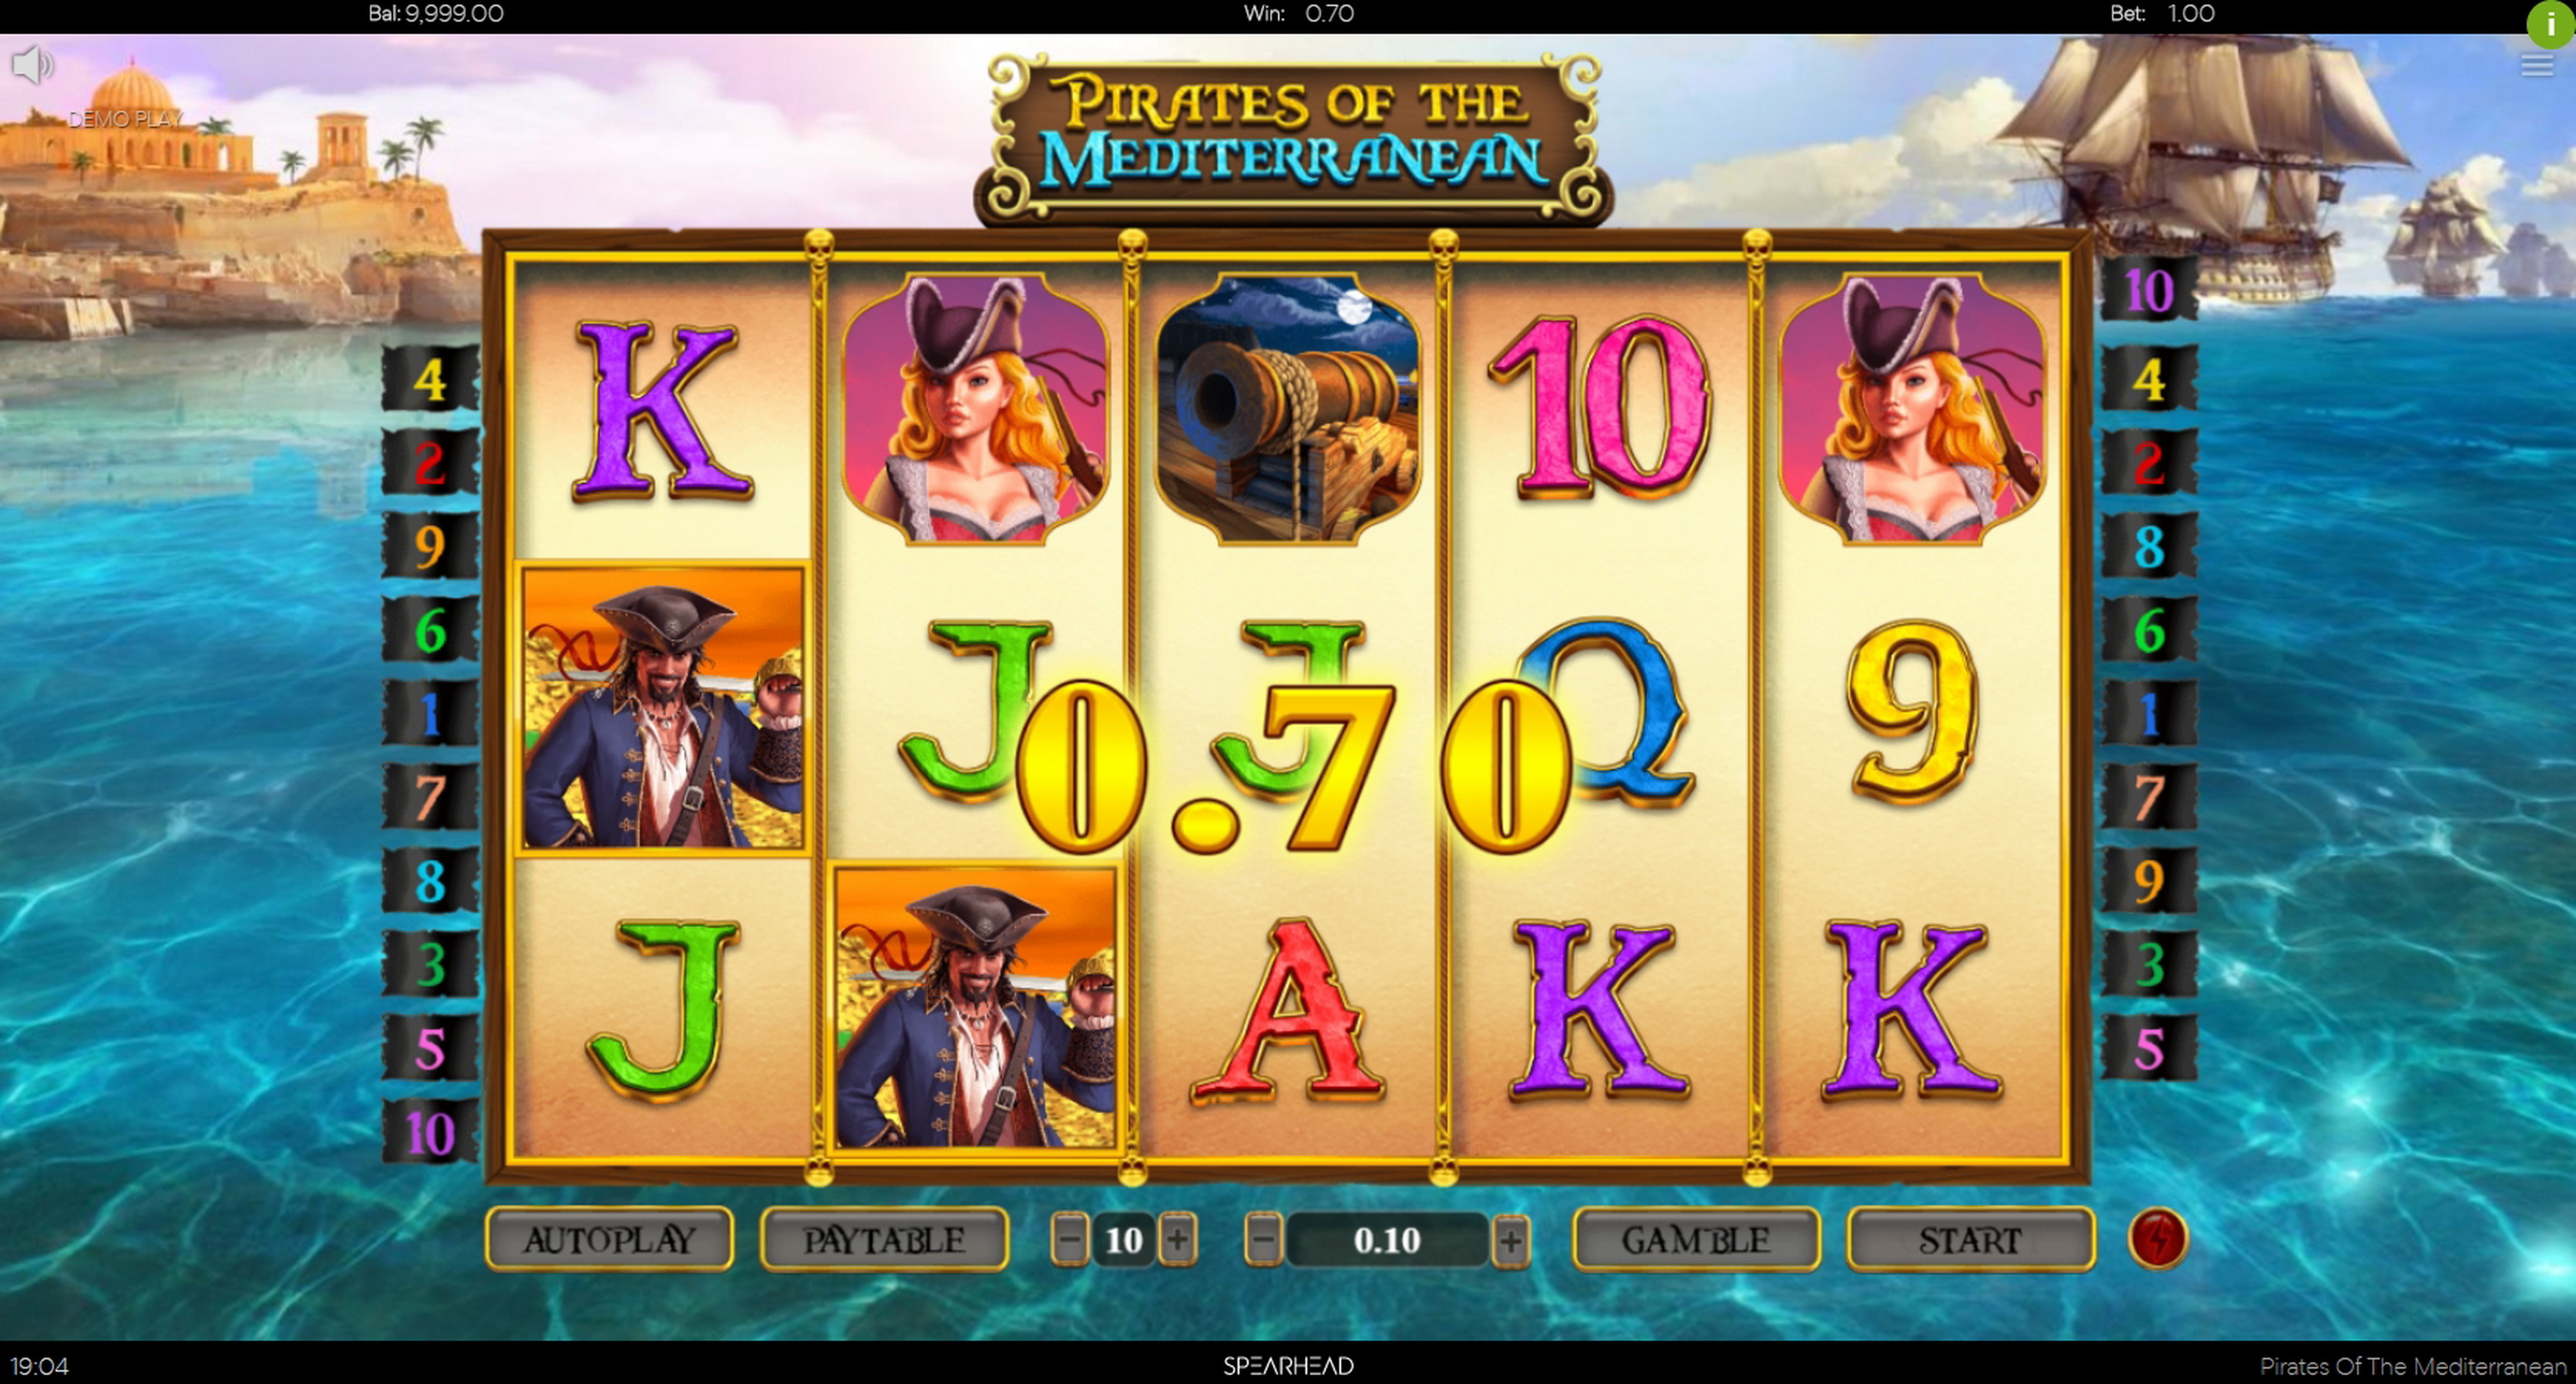 Win Money in Pirates Of The Mediterranean Free Slot Game by Spearhead Studios